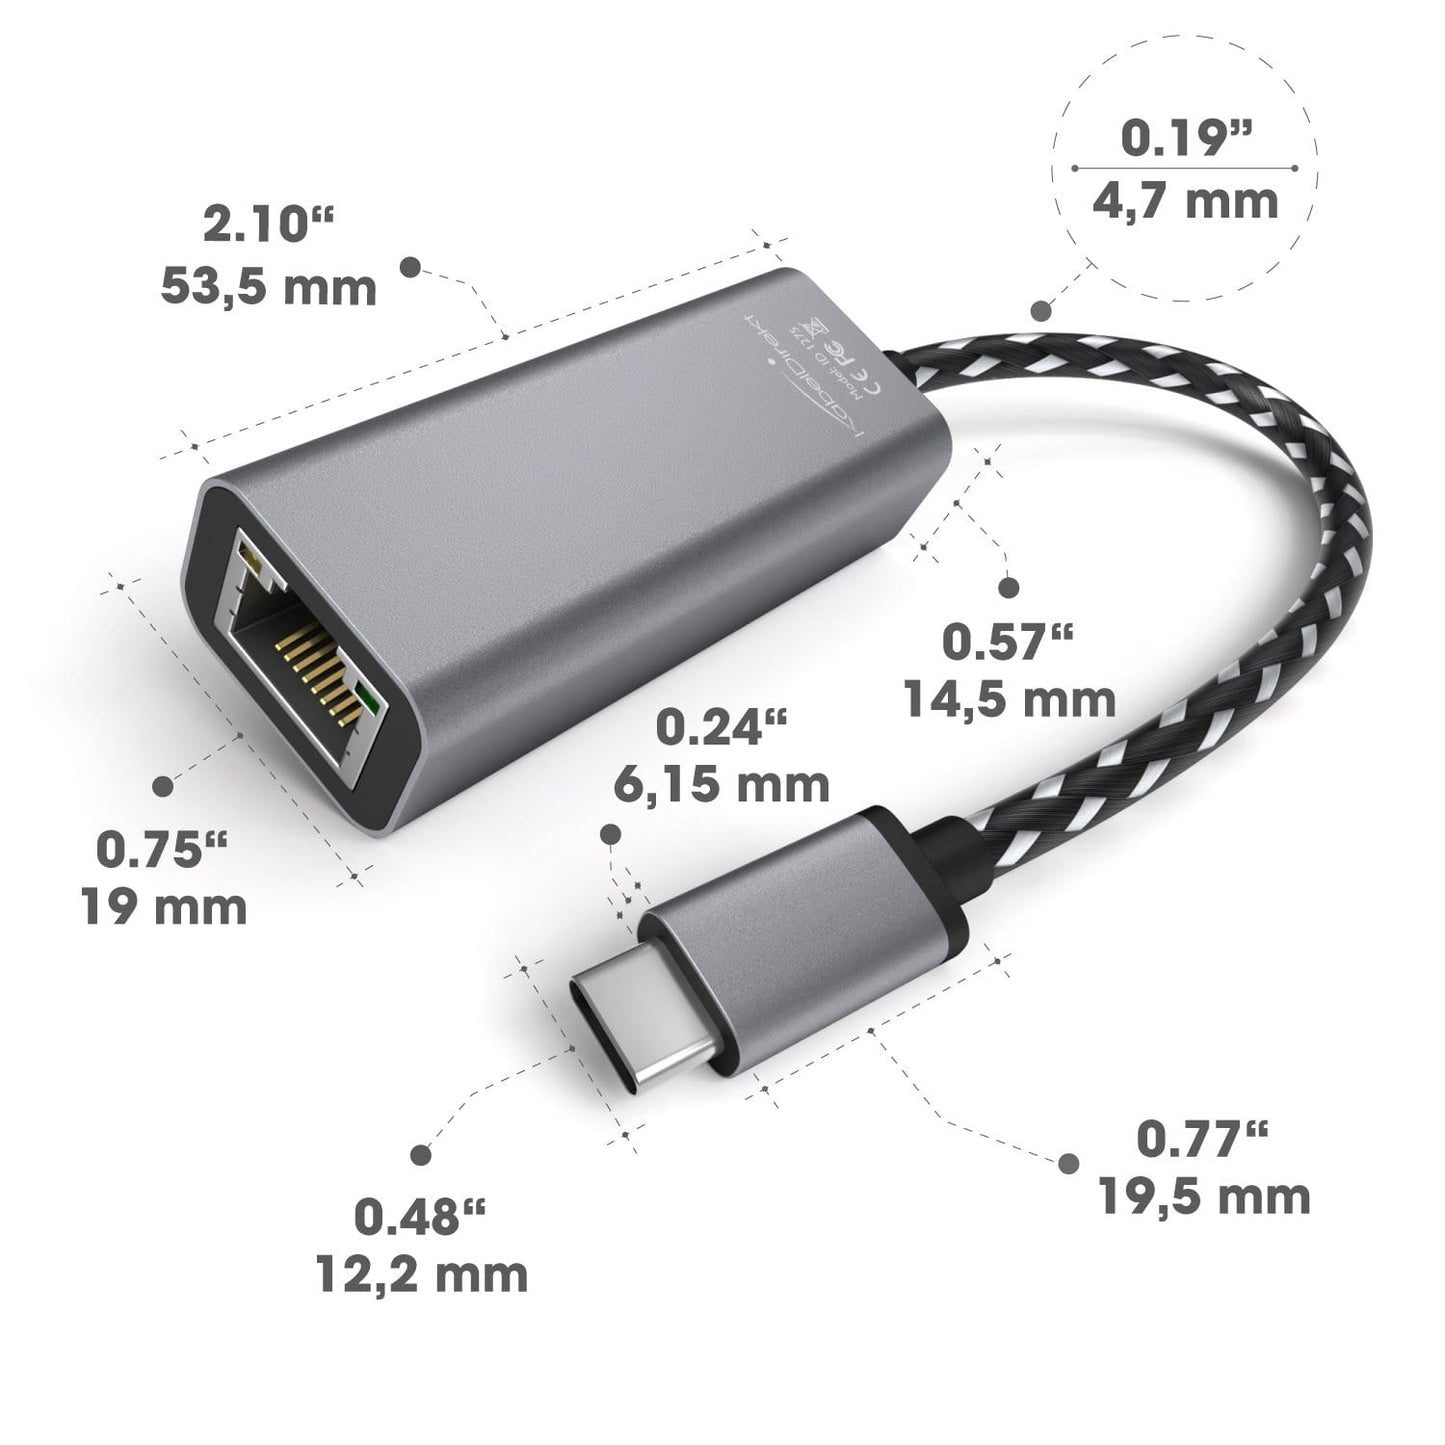 USB-C Ethernet Adapter - For connecting network cables to devices with a USB-C port, 1 Gbps